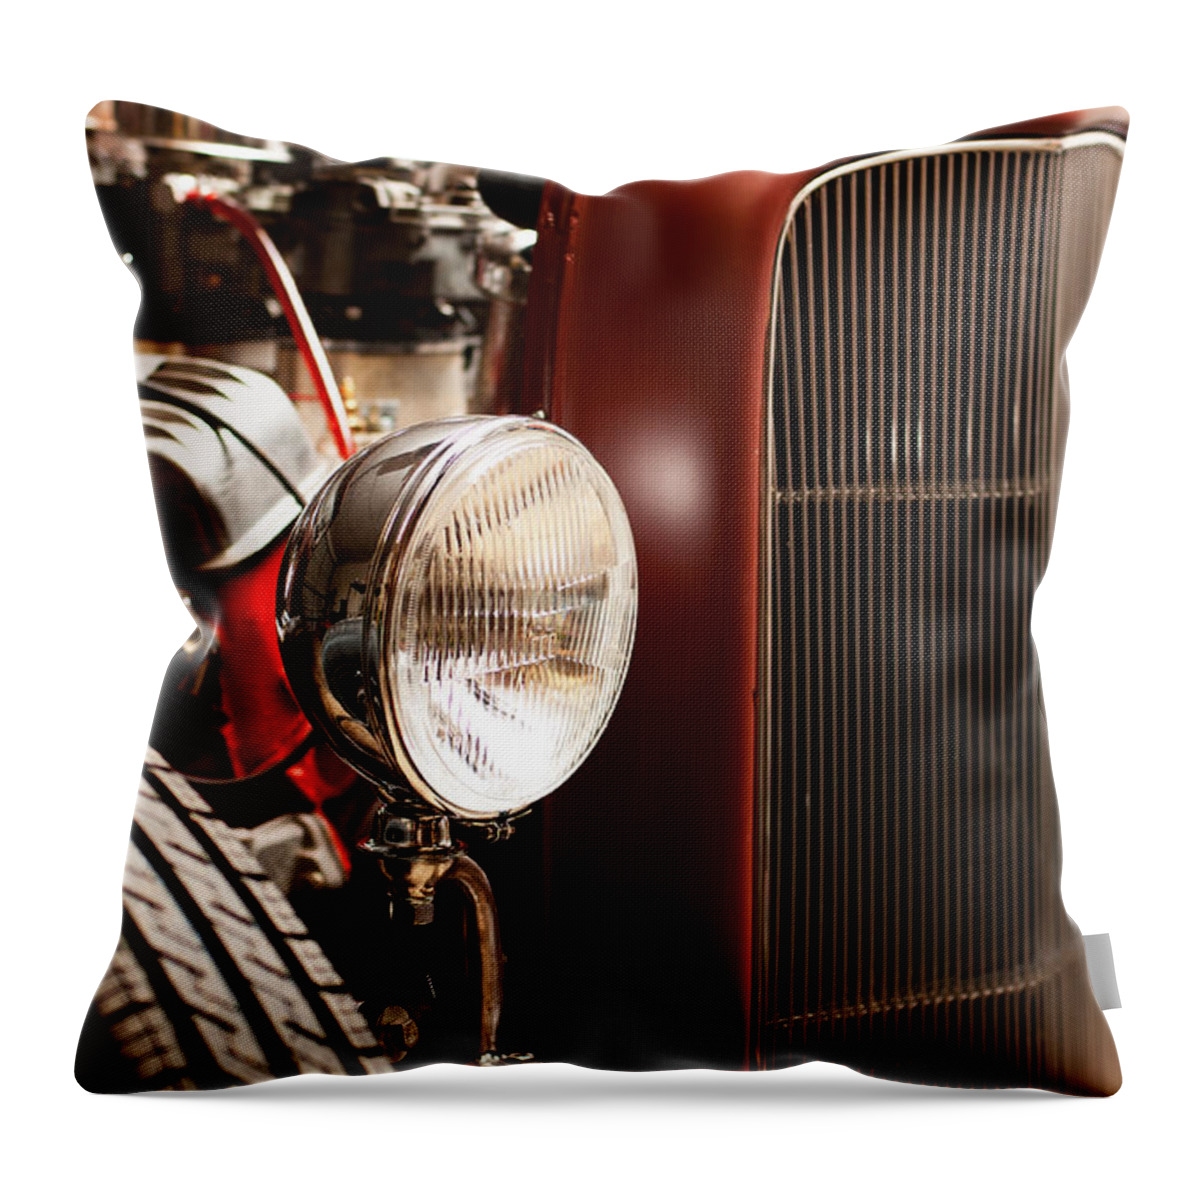 Hotrod Throw Pillow featuring the photograph 1932 Ford Hotrod by Todd Aaron